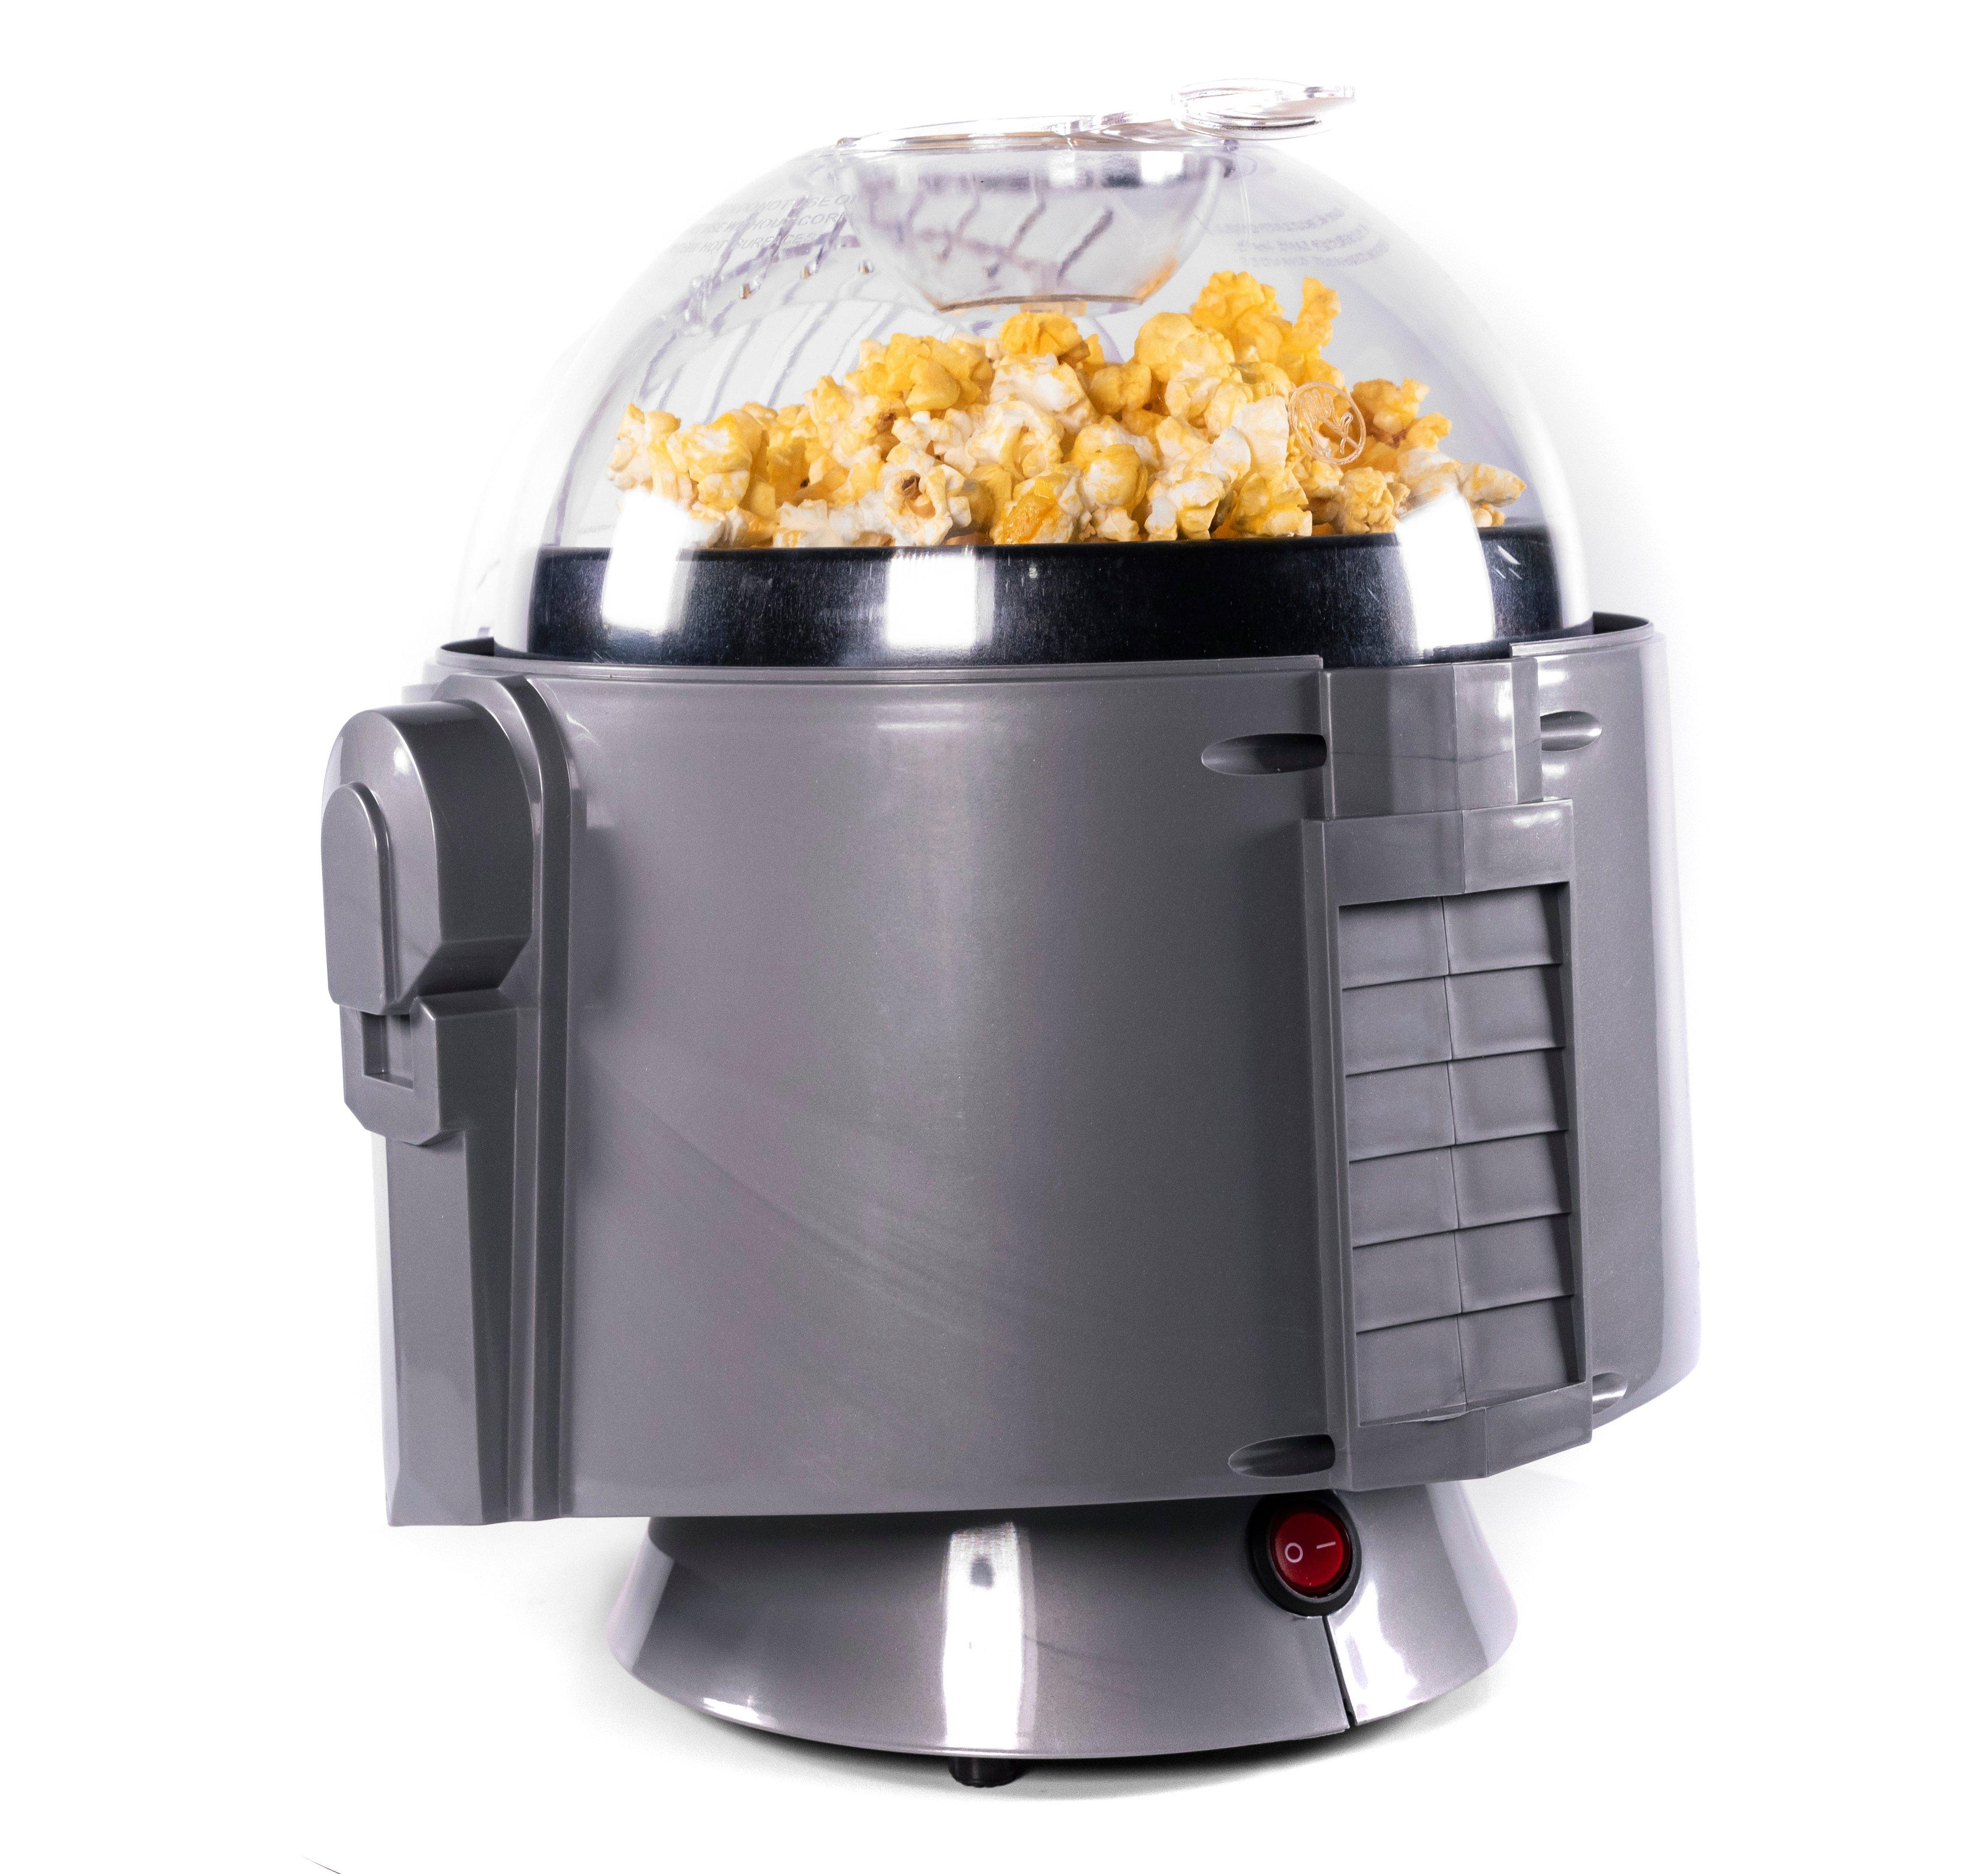 Popcorn Maker Machine at Lowest Price Buy From- 5 Core